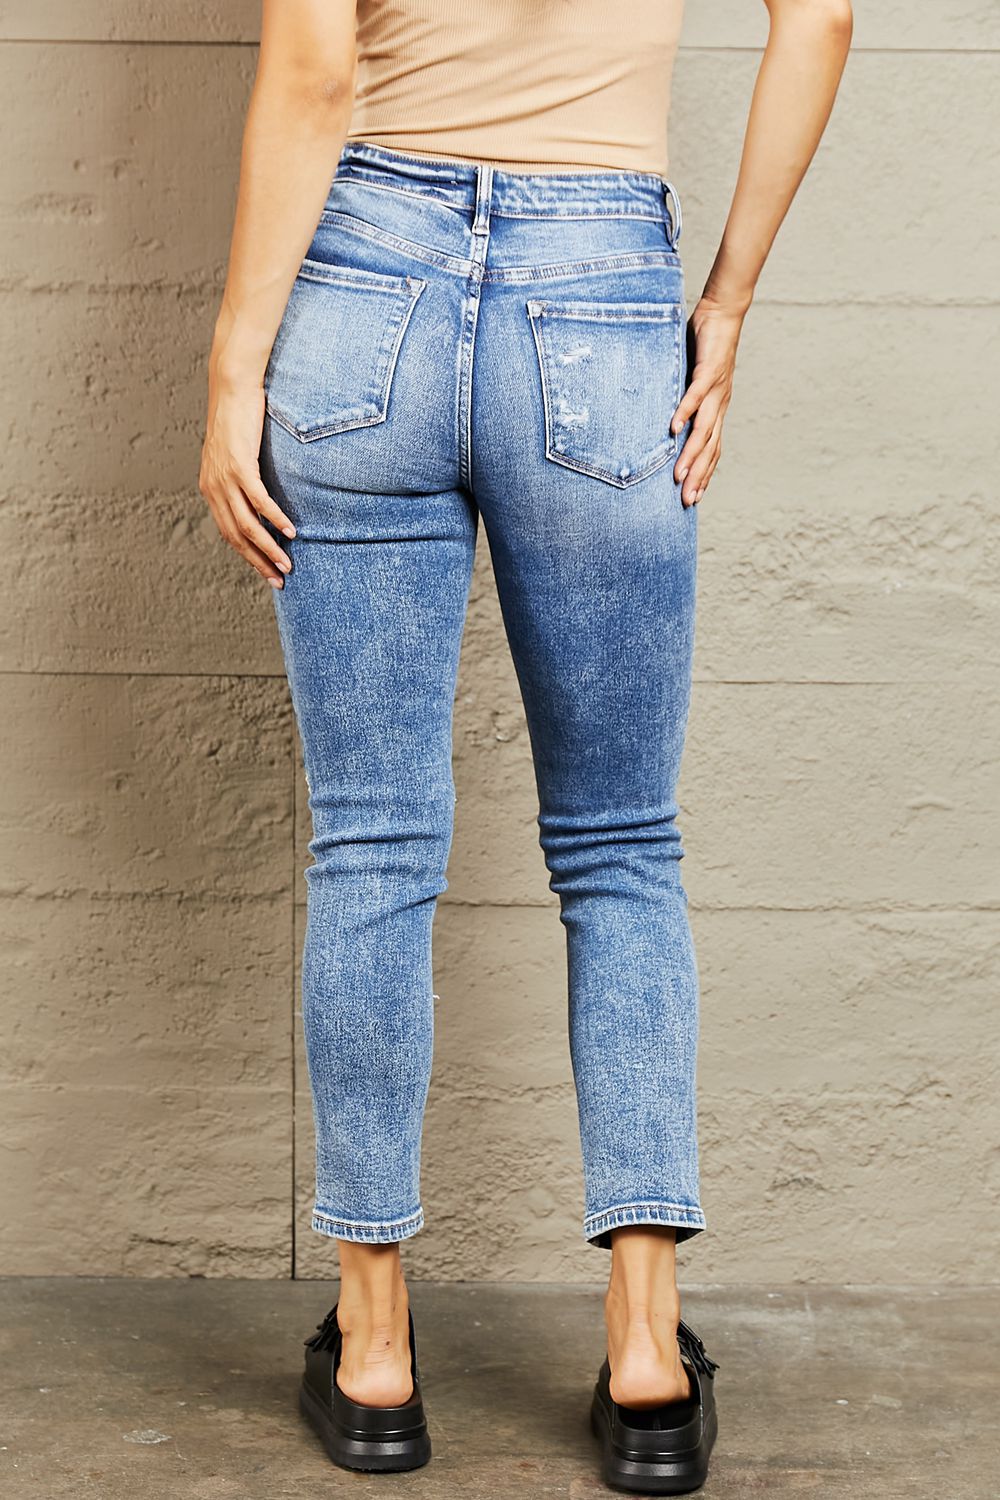 BAYEAS Mid Rise Distressed Skinny Jeans - Jeans - FITGGINS